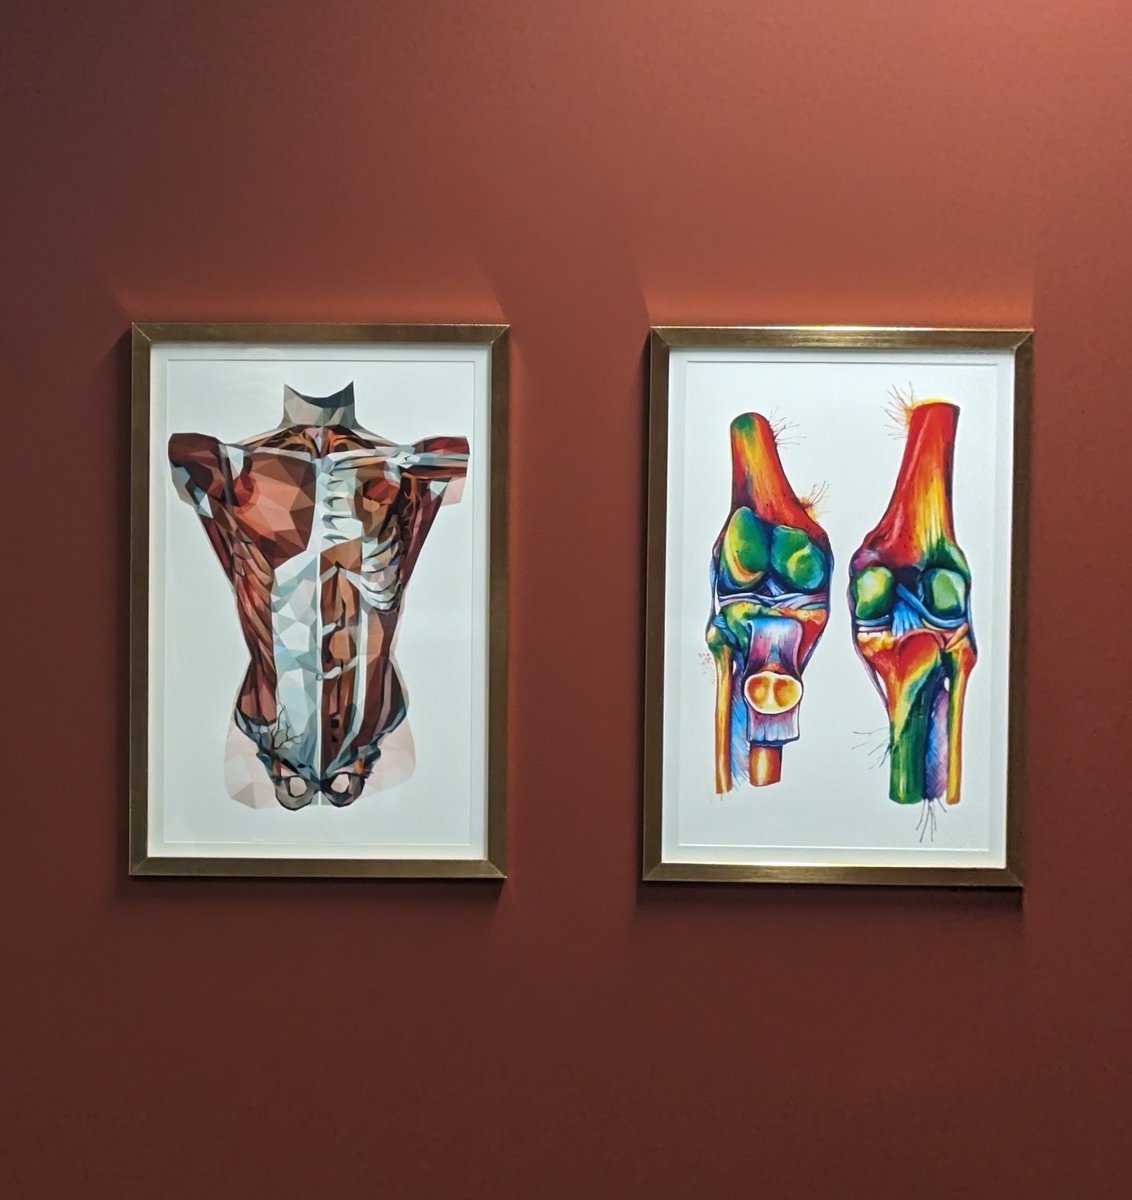 #RadArt, curated by @kjpacheco79 and fancifully hung in our Radiology suite. Visually-inclined, as a rule, our sights are set on empowering a new Arts & Medicine gallery @ USC🤞! 👀 That means we're interested in hearing from creatives like YOU in the med community! ♥️🎨 1/2